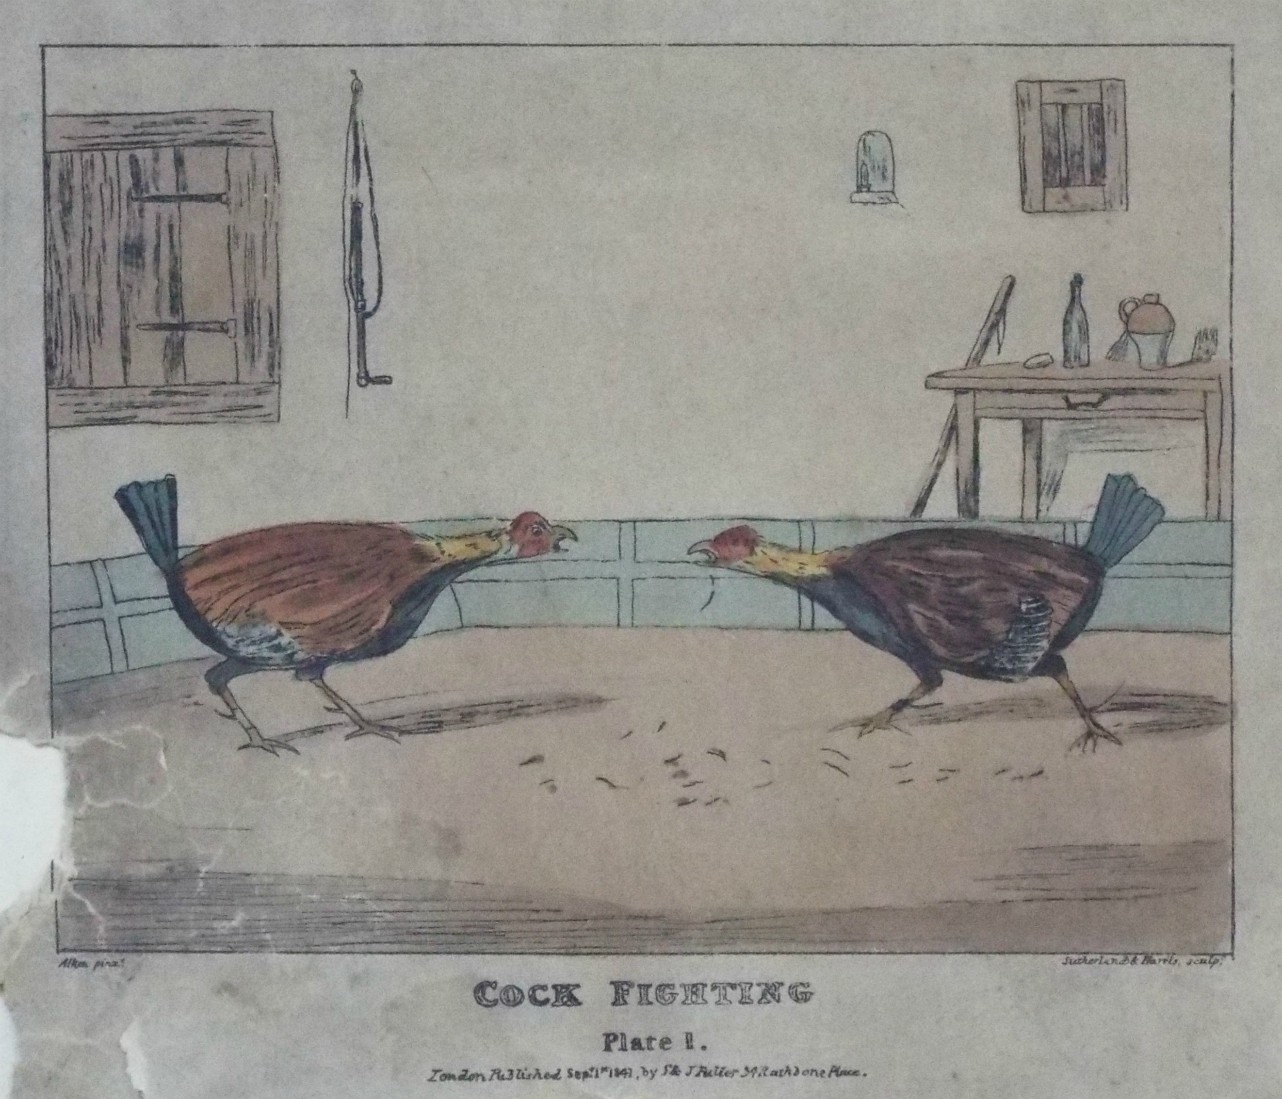 Lithograph - 4 Cock Fighting Plate 1. - Sutherland